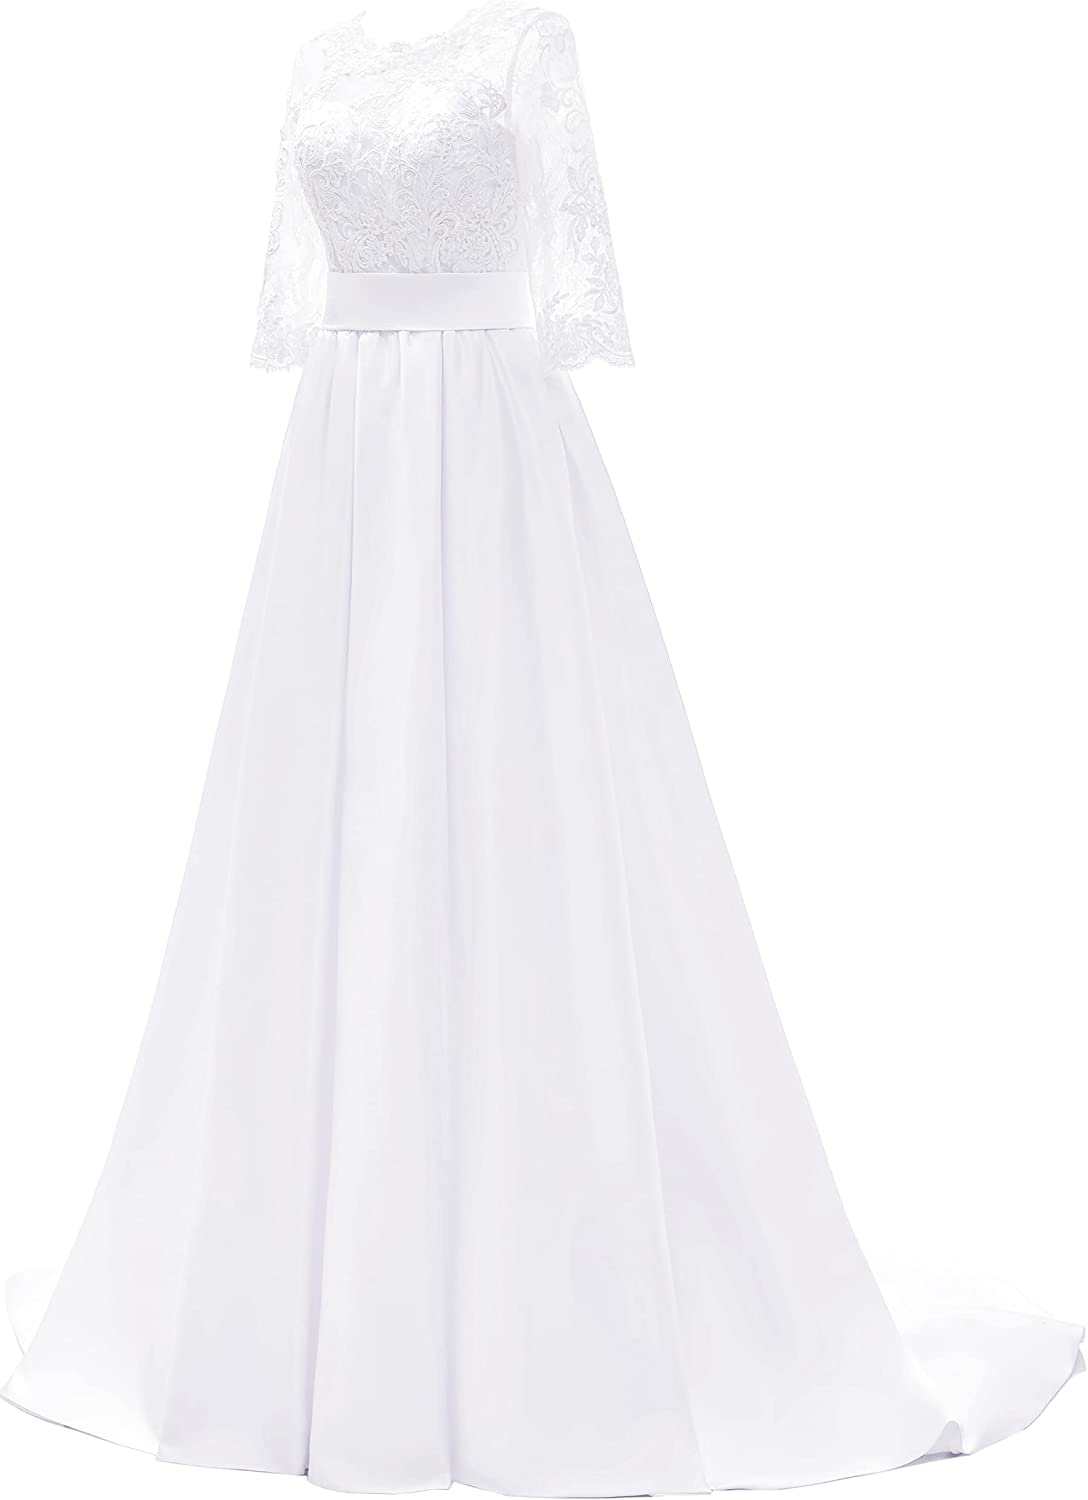 Women's Ball Gown Lace Bridal Wedding Dresses